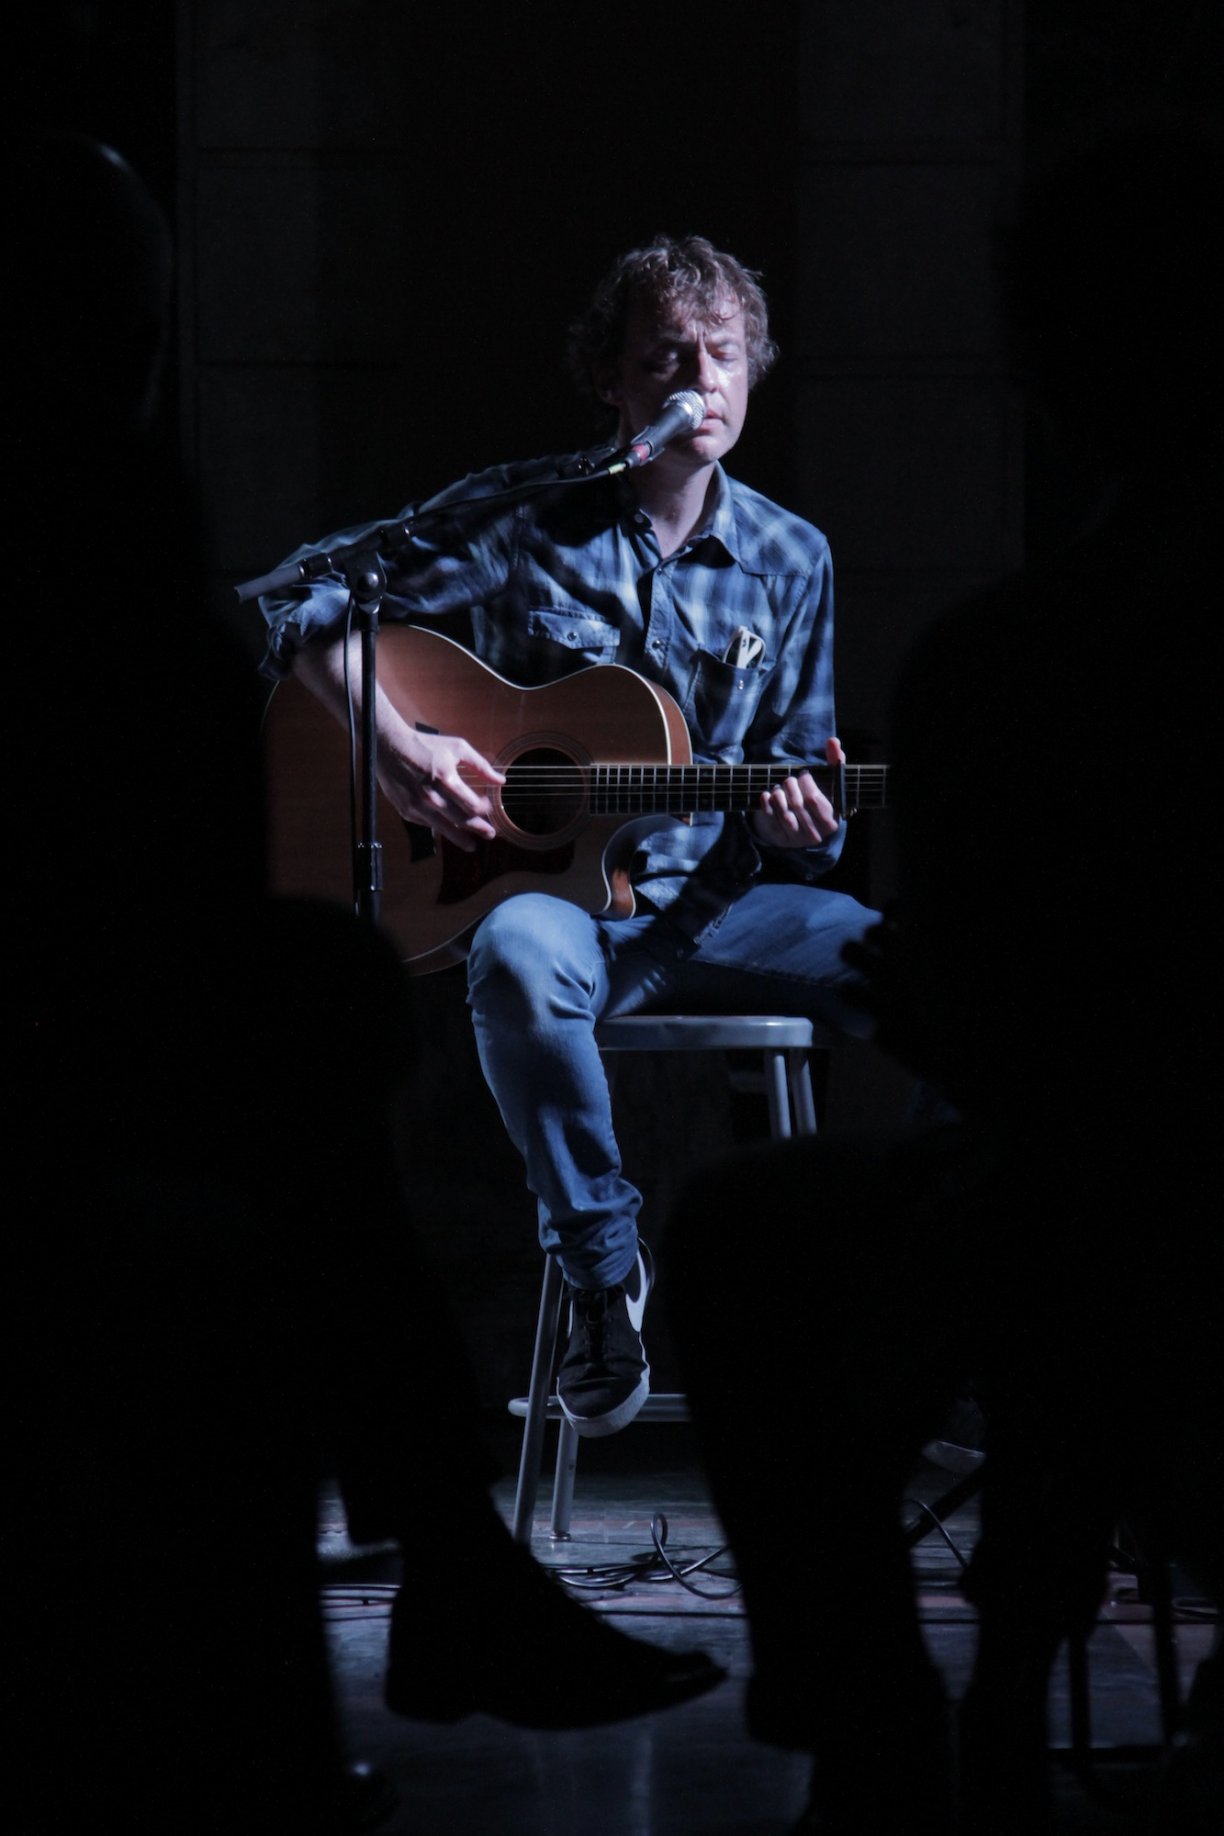 Richard Youngs by Bradley Buehring 9/05/13